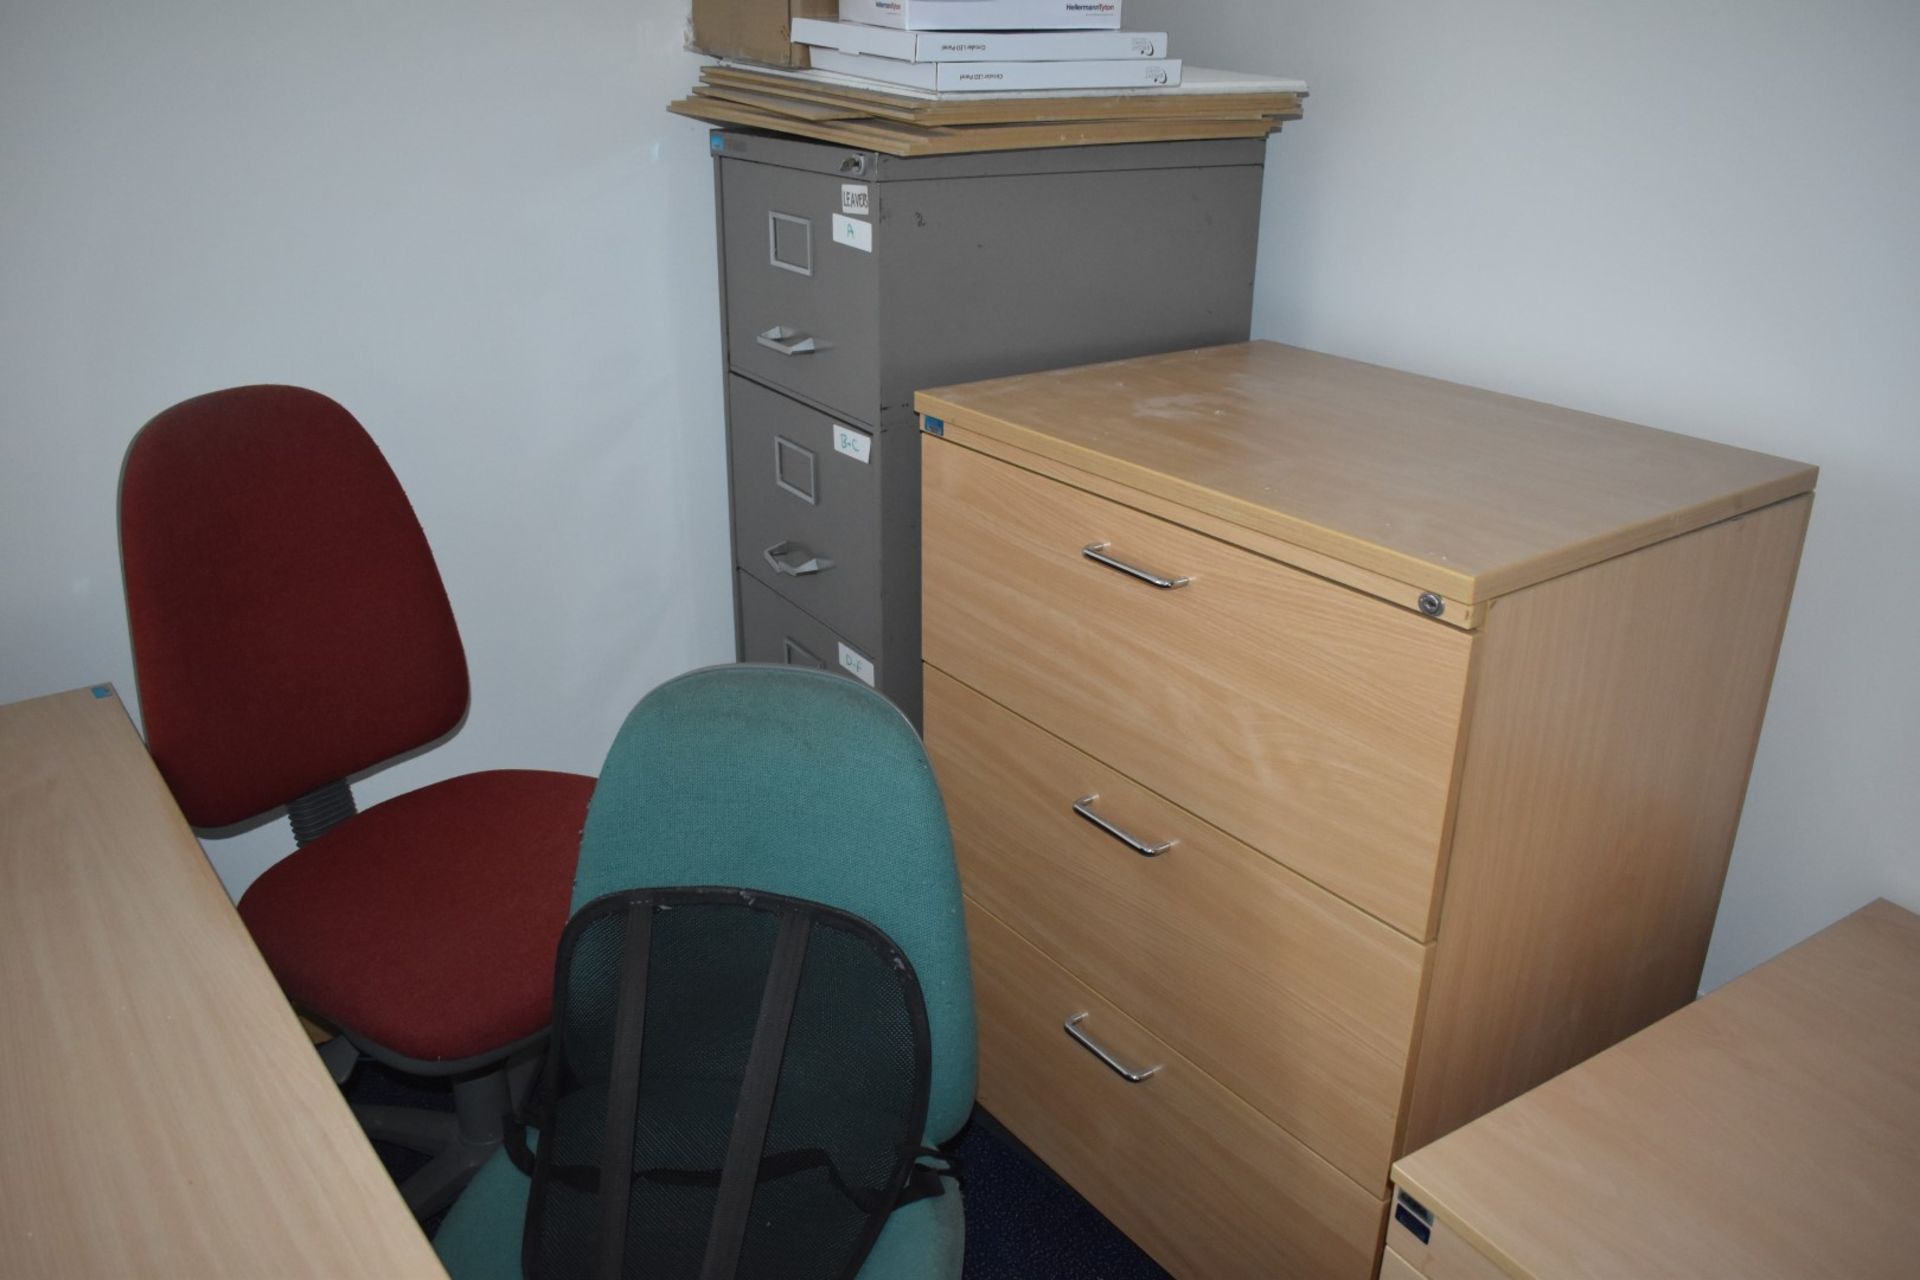 1 x Assorted Collection of Office Furniture - Includes 2 x 160cm Office Desks, 3 x Swivel Chairs, - Image 2 of 7